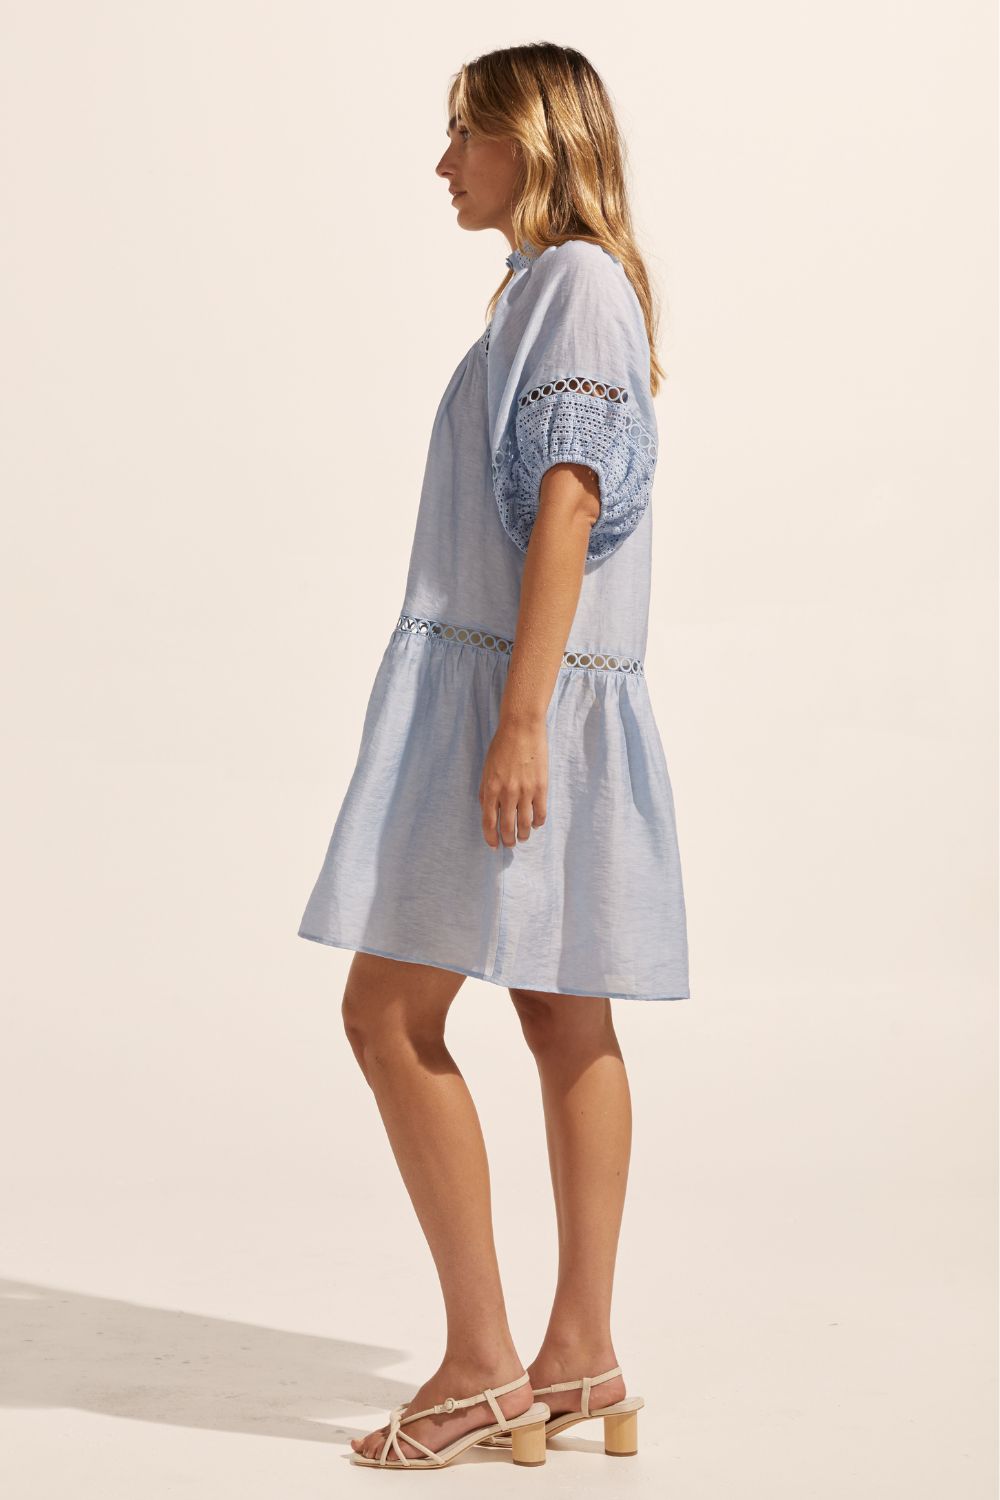 blue, high neck, covered buttons, circular lace detailing, drop waist, mid-length sleeve, mini dress, side image